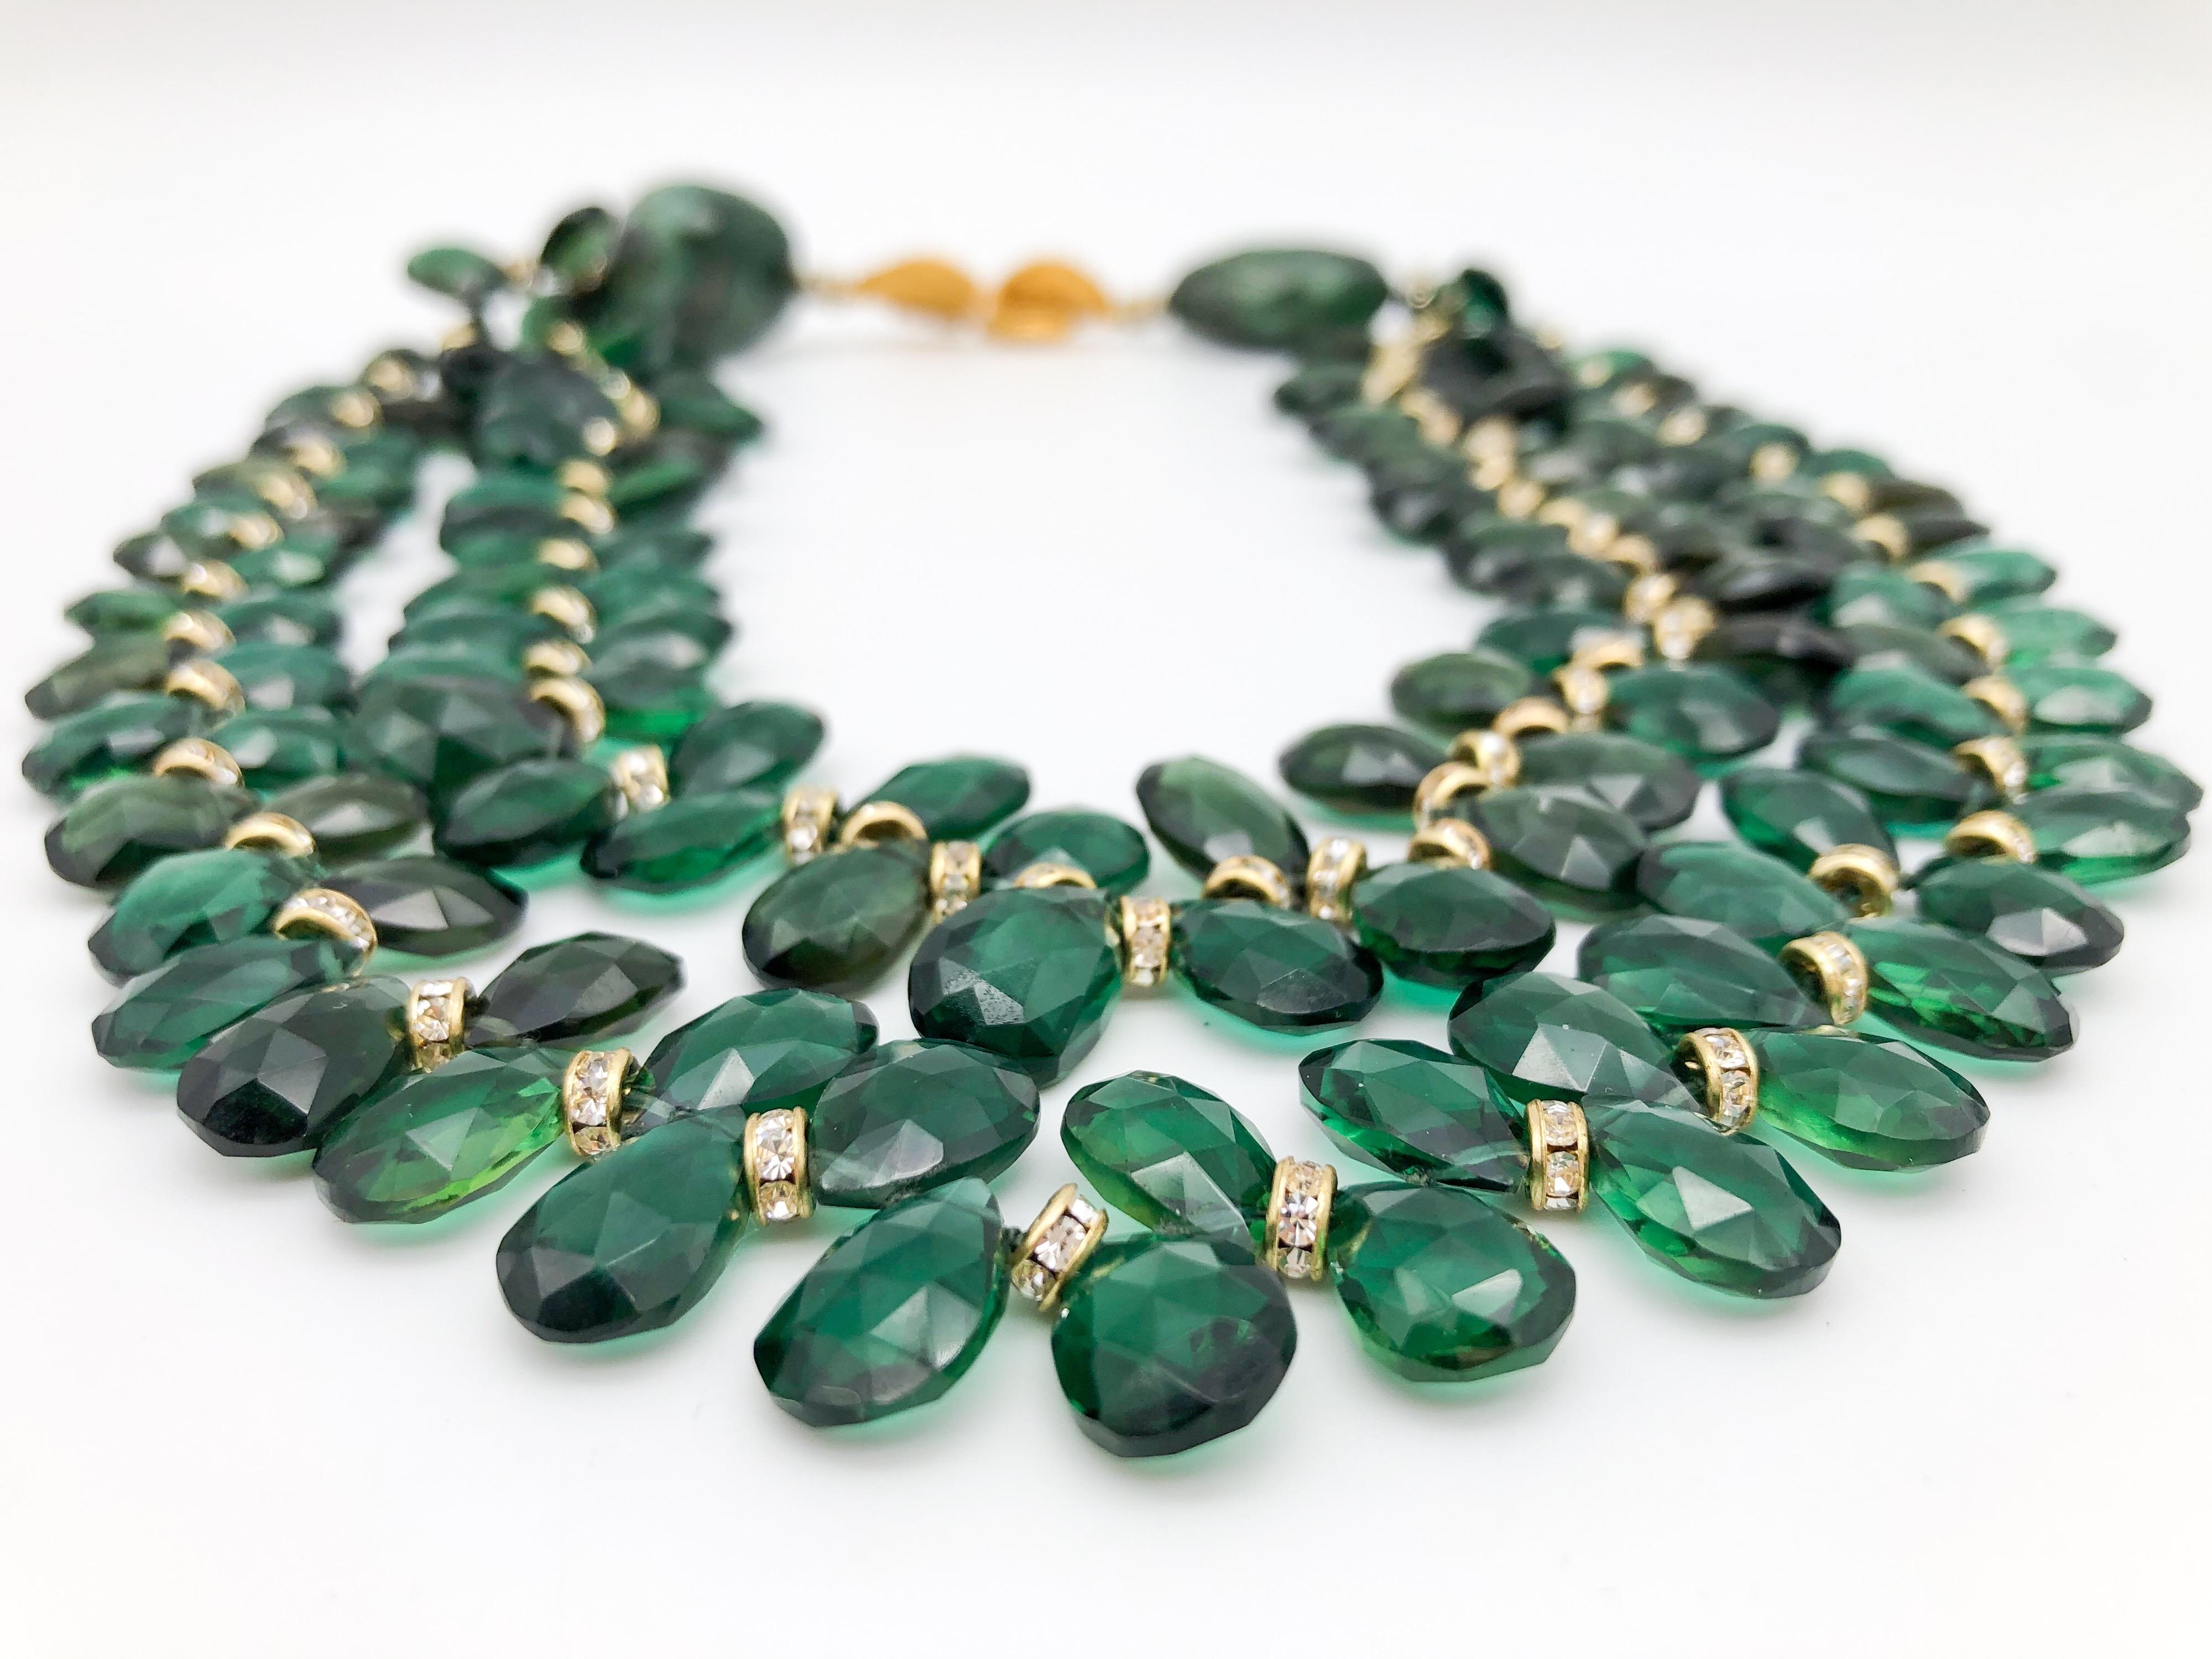 One-of-a-Kind
Show stopper double-strand faceted Green Quartz, teardrop cut beads have a vitreous luster with high brilliance, show exceptional faceting and polish, are well-matched with Cz spacers, and 2 hand-cut faceted Emeralds. The necklace is